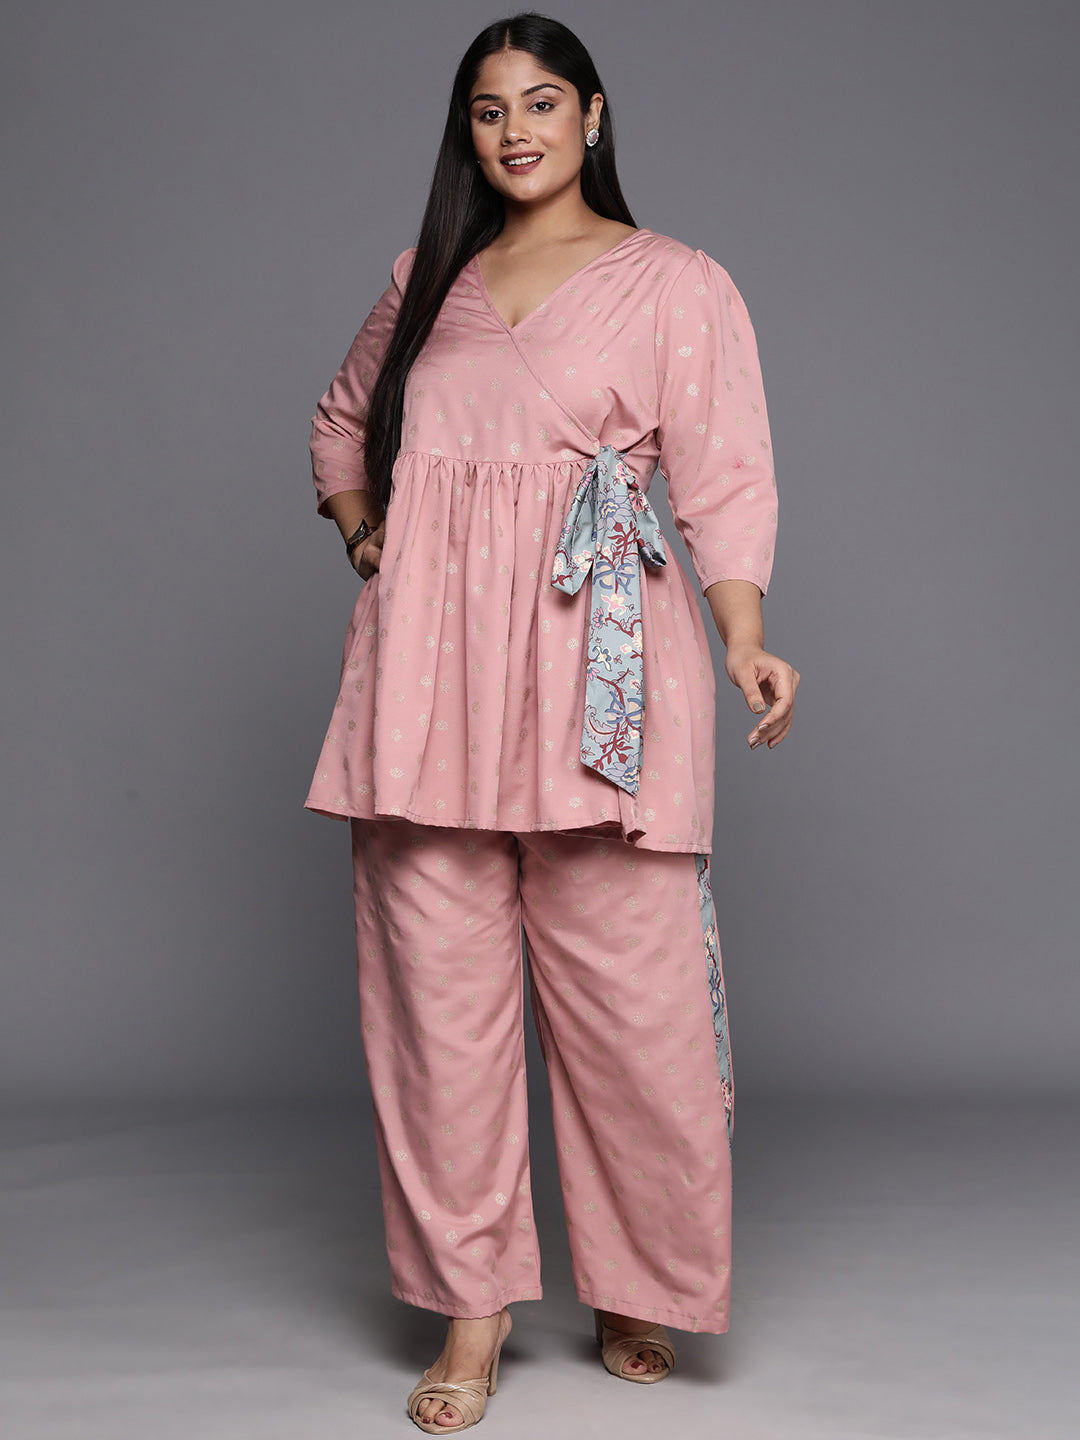 A PLUS BY AHALYAA Plus Size Ethnic Printed Wrap Tunic with Palazzos